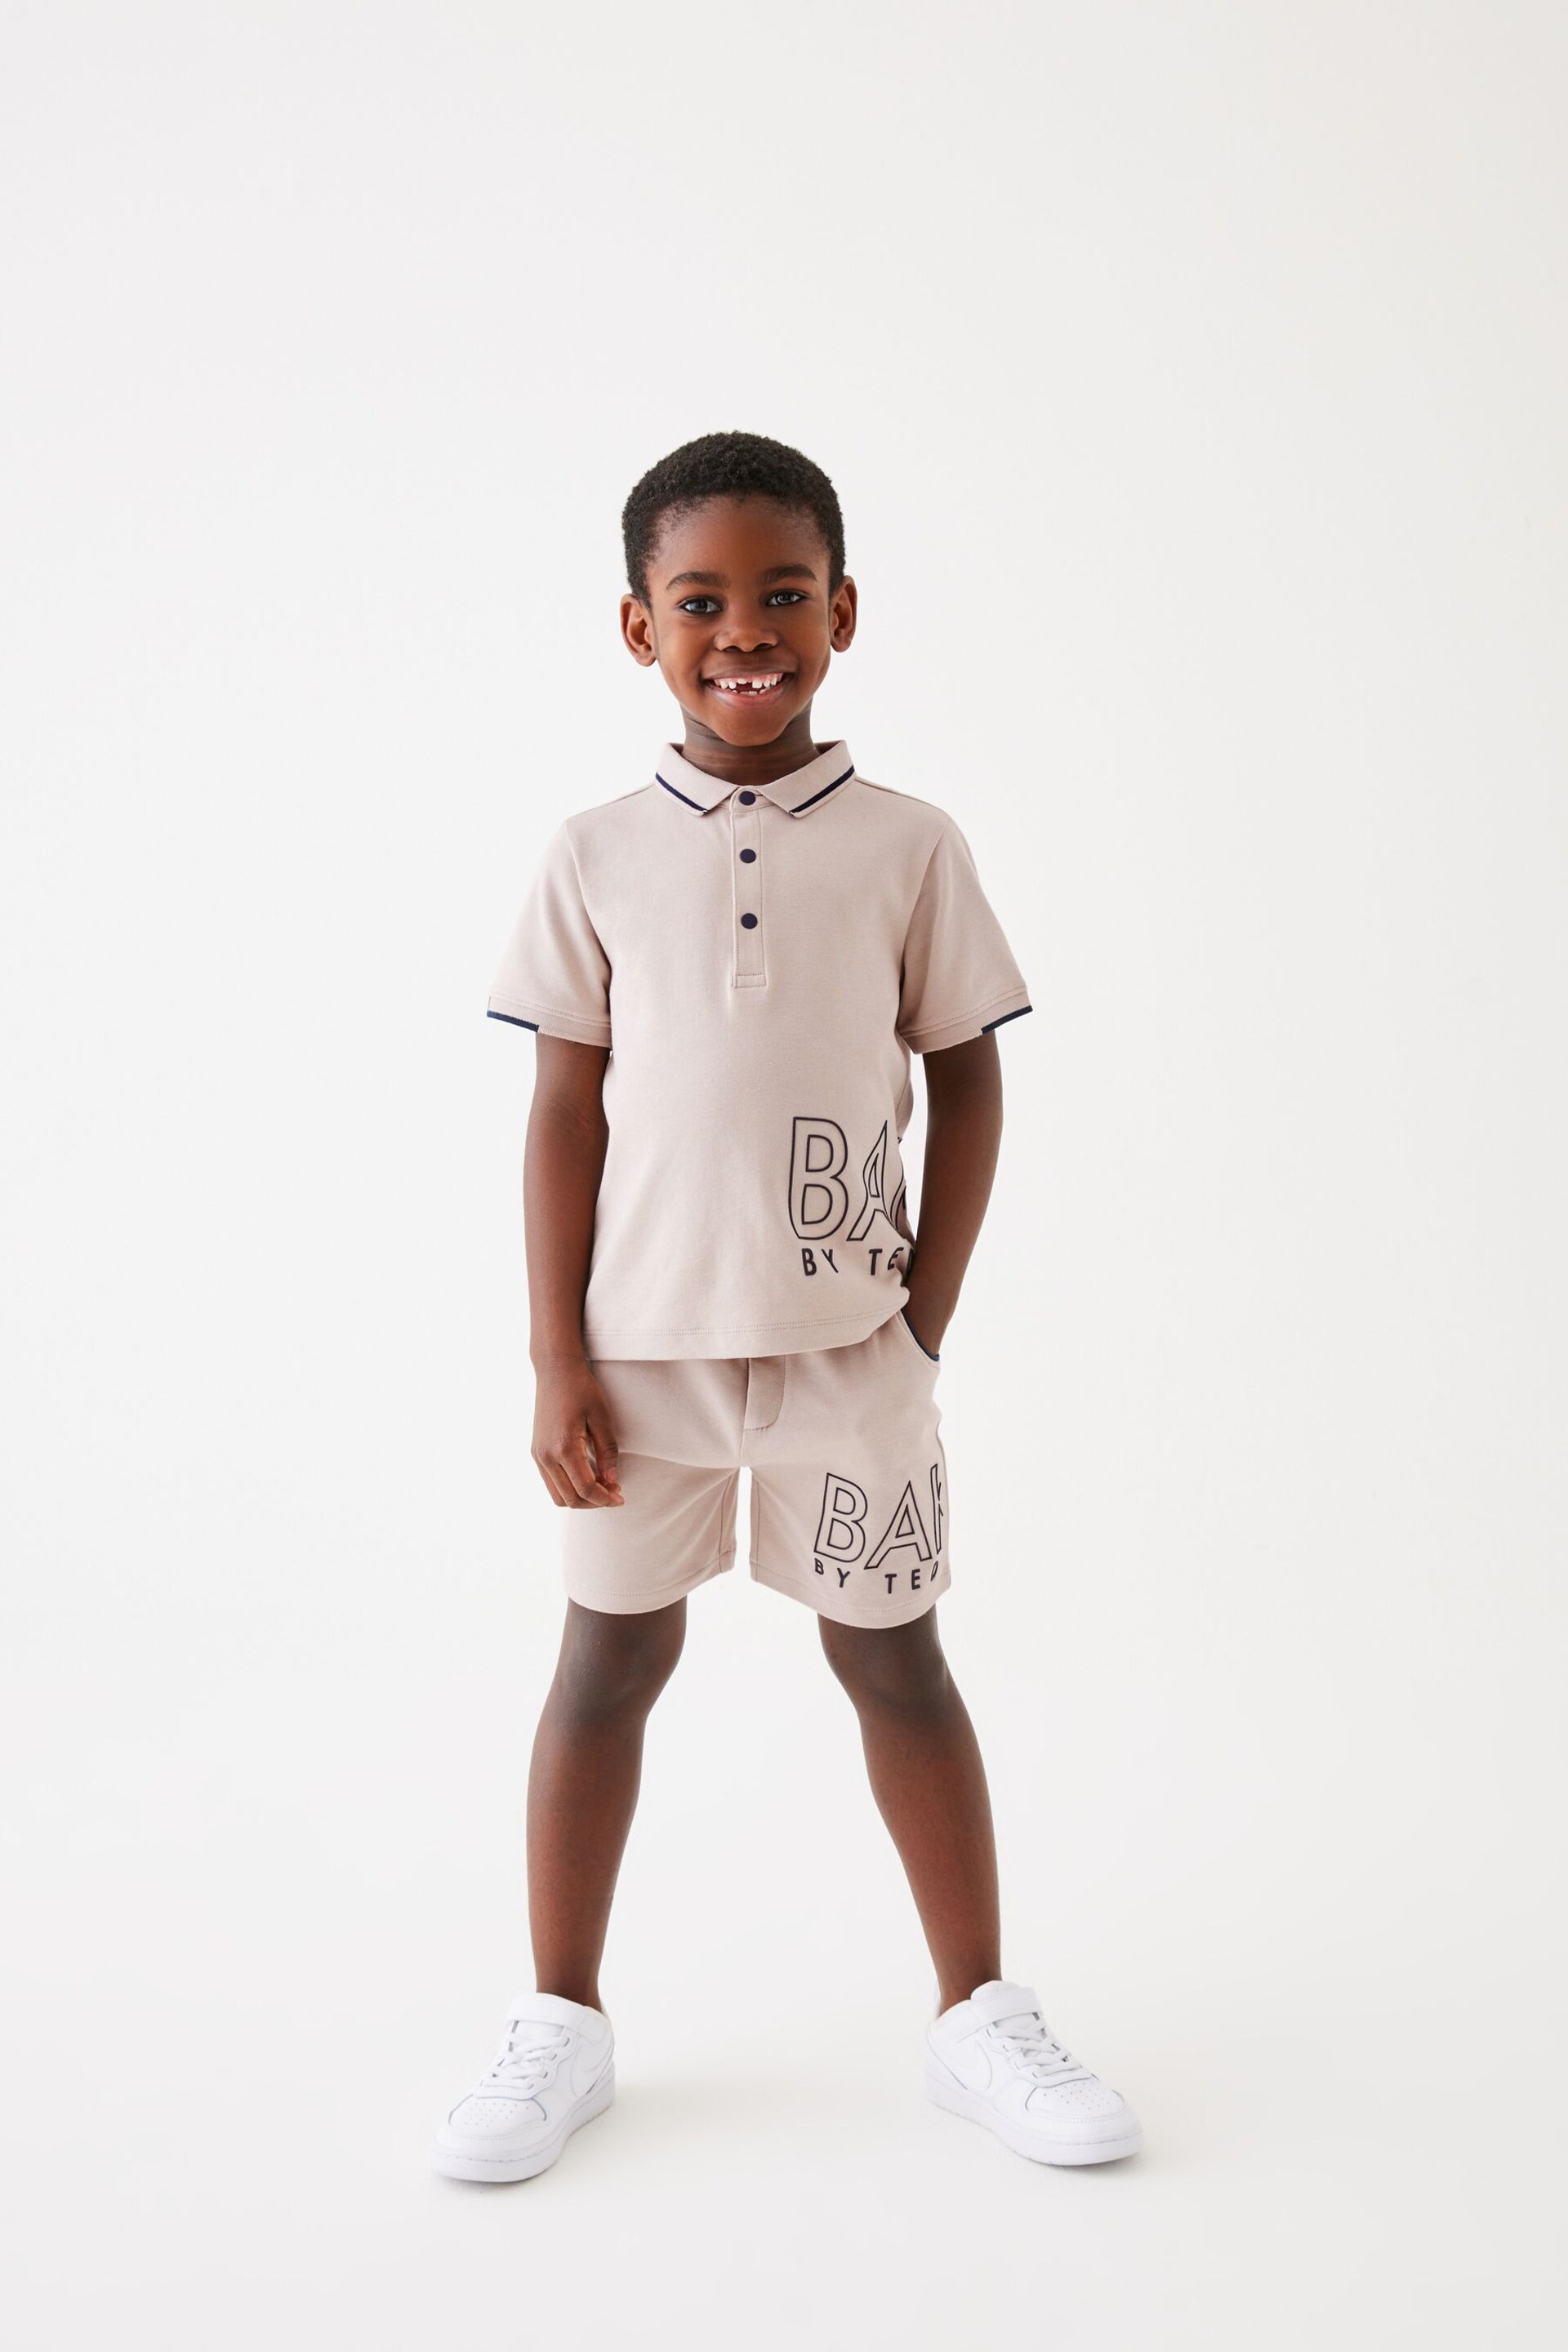 Baker by Ted Baker Stone Polo Shirt and Short Set - Image 1 of 8